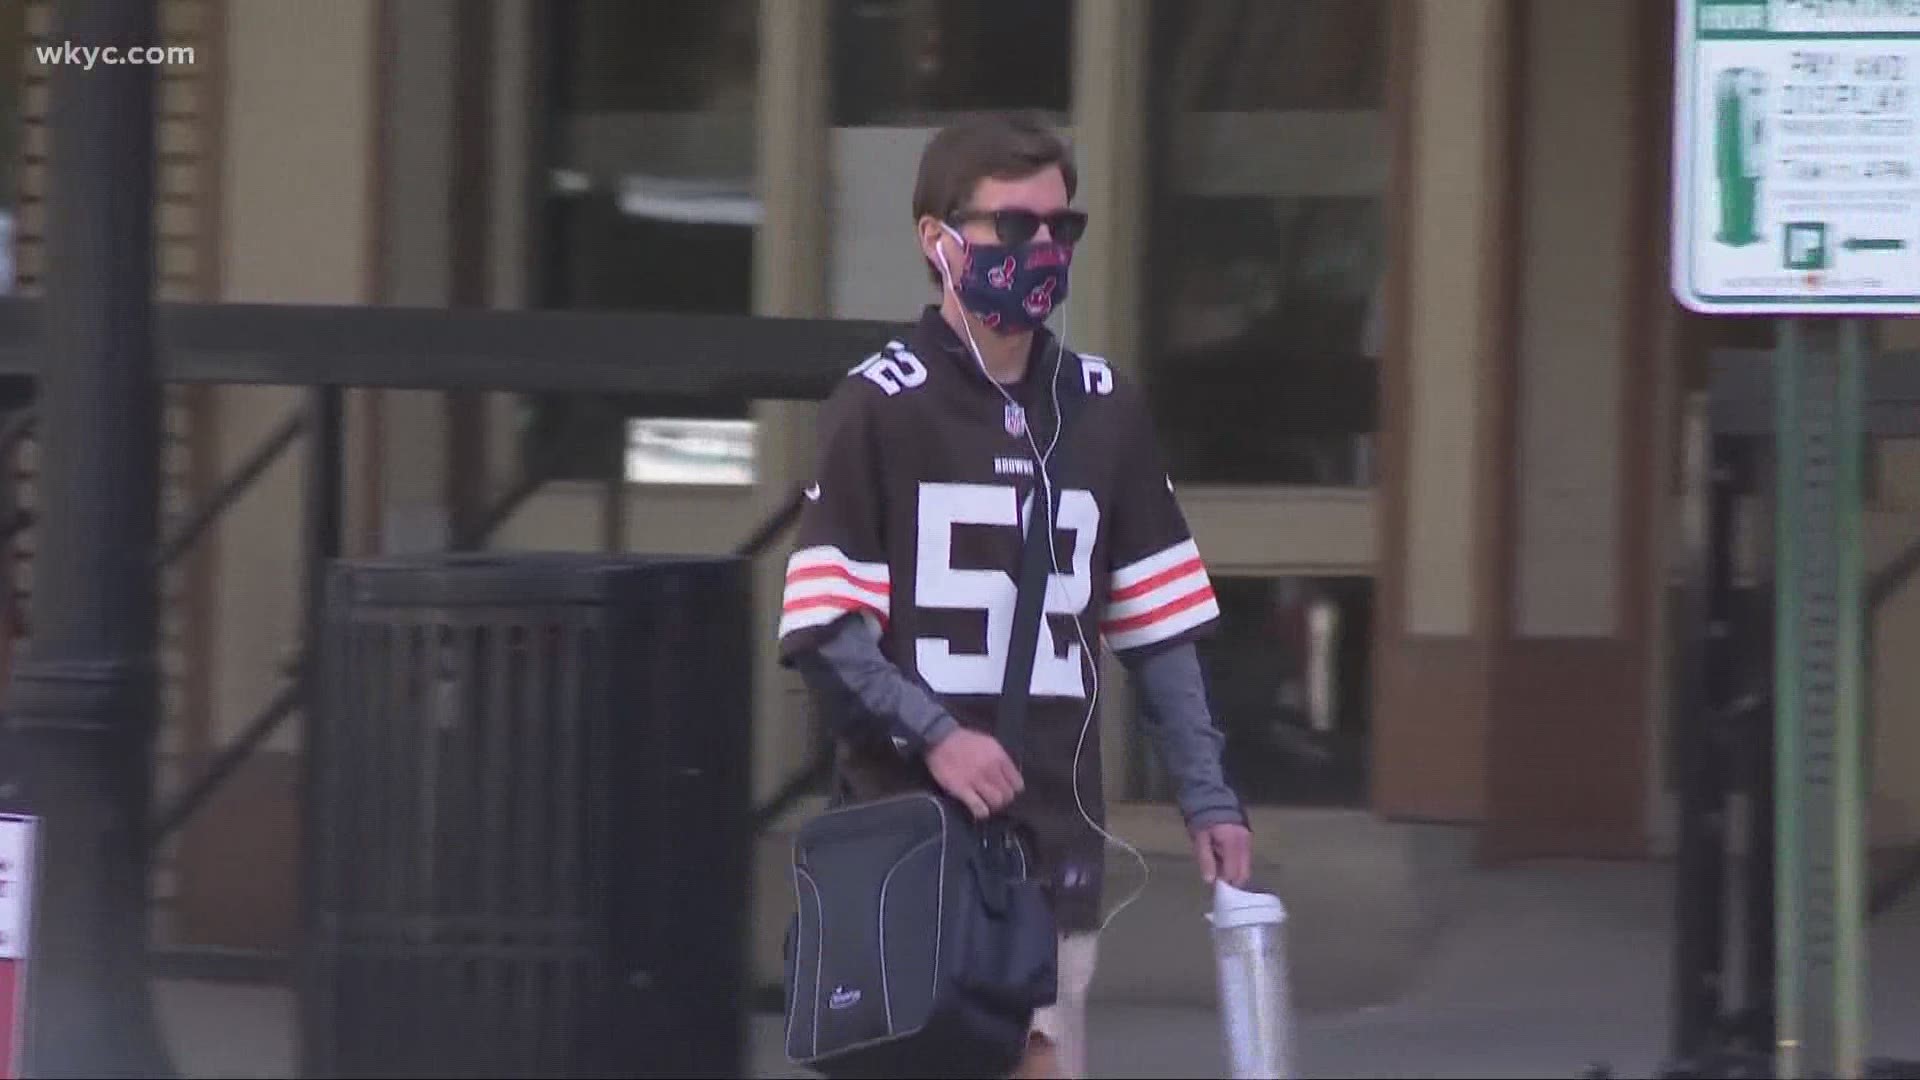 Despite the pandemic, the immortal Browns Backers remain optimistic, especially with the team firmly in the playoff race. Andrew Horansky reports.